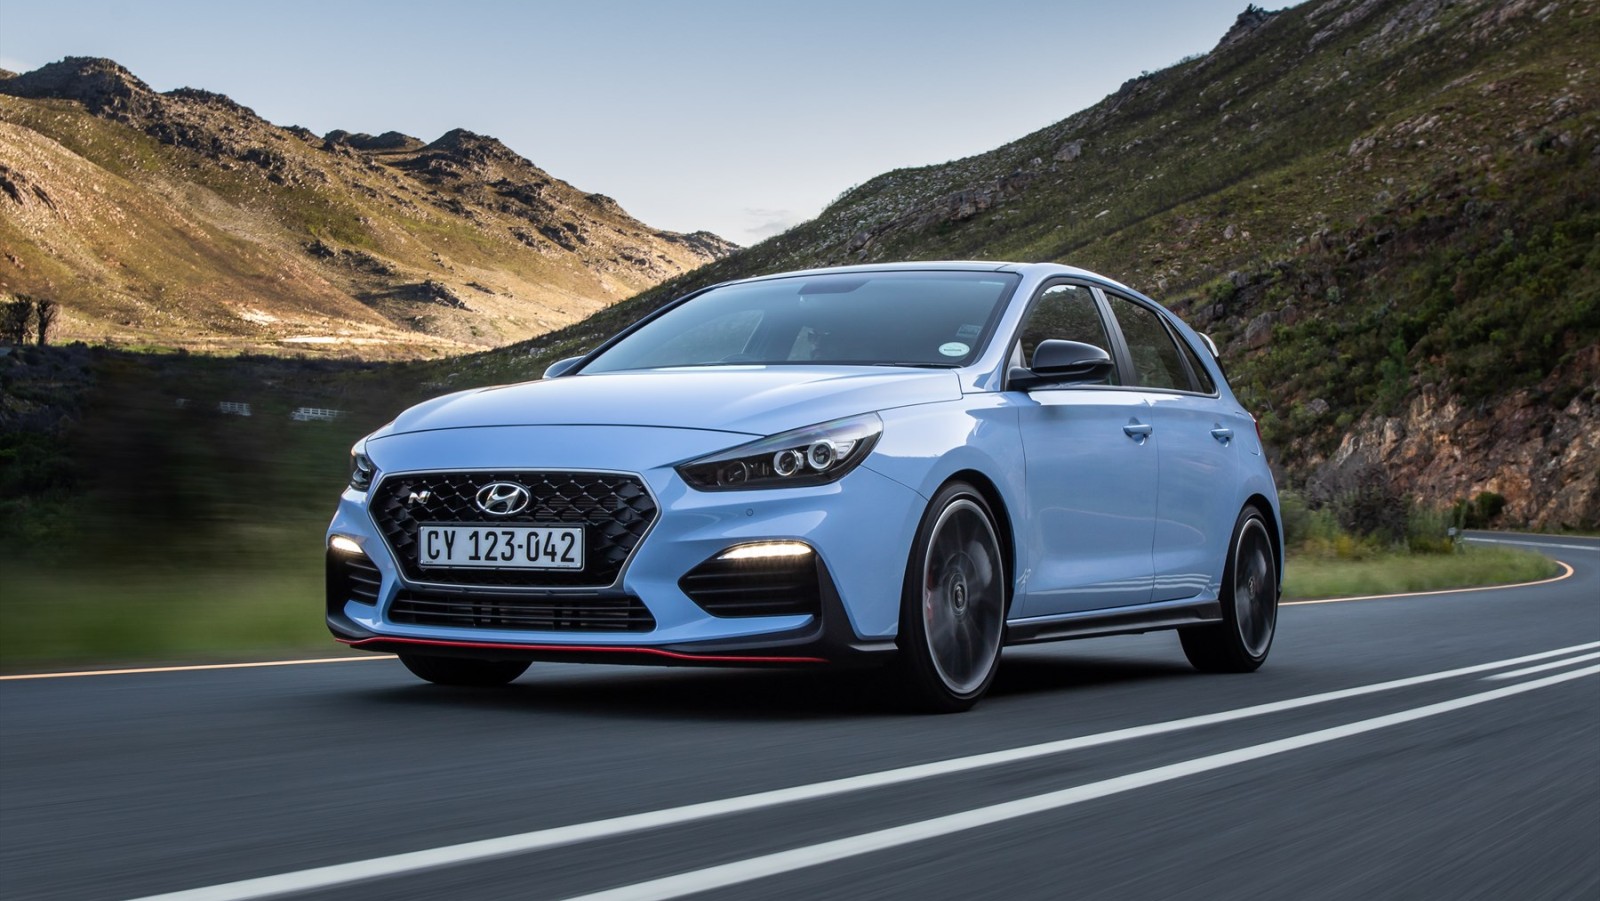 The Hyundai i30 N is the company's fastest car yet